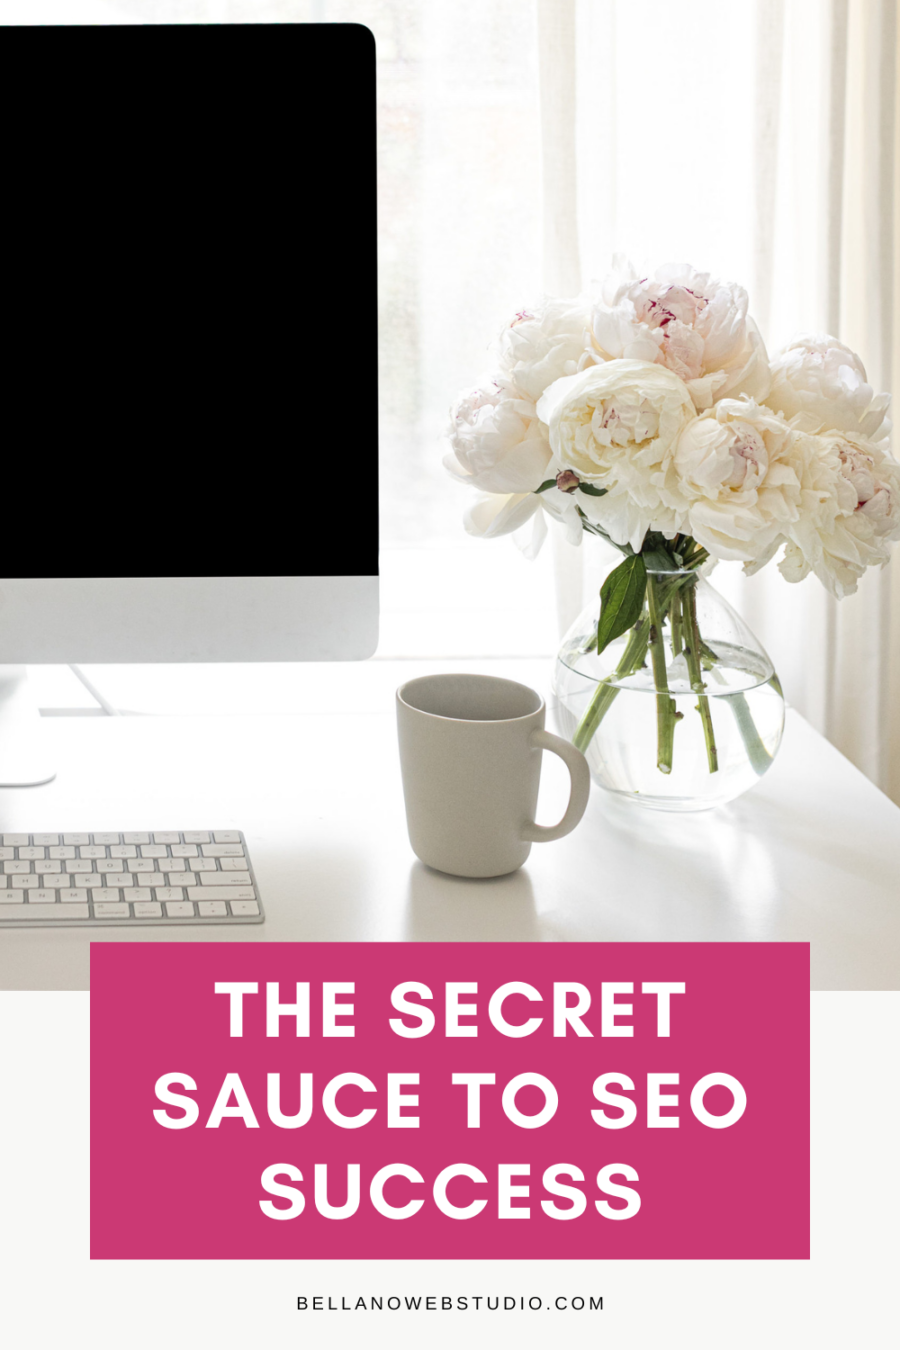 The Secret Sauce to Achieving SEO Success Lies in Consistently Creating Killer Content! It can make all the difference.